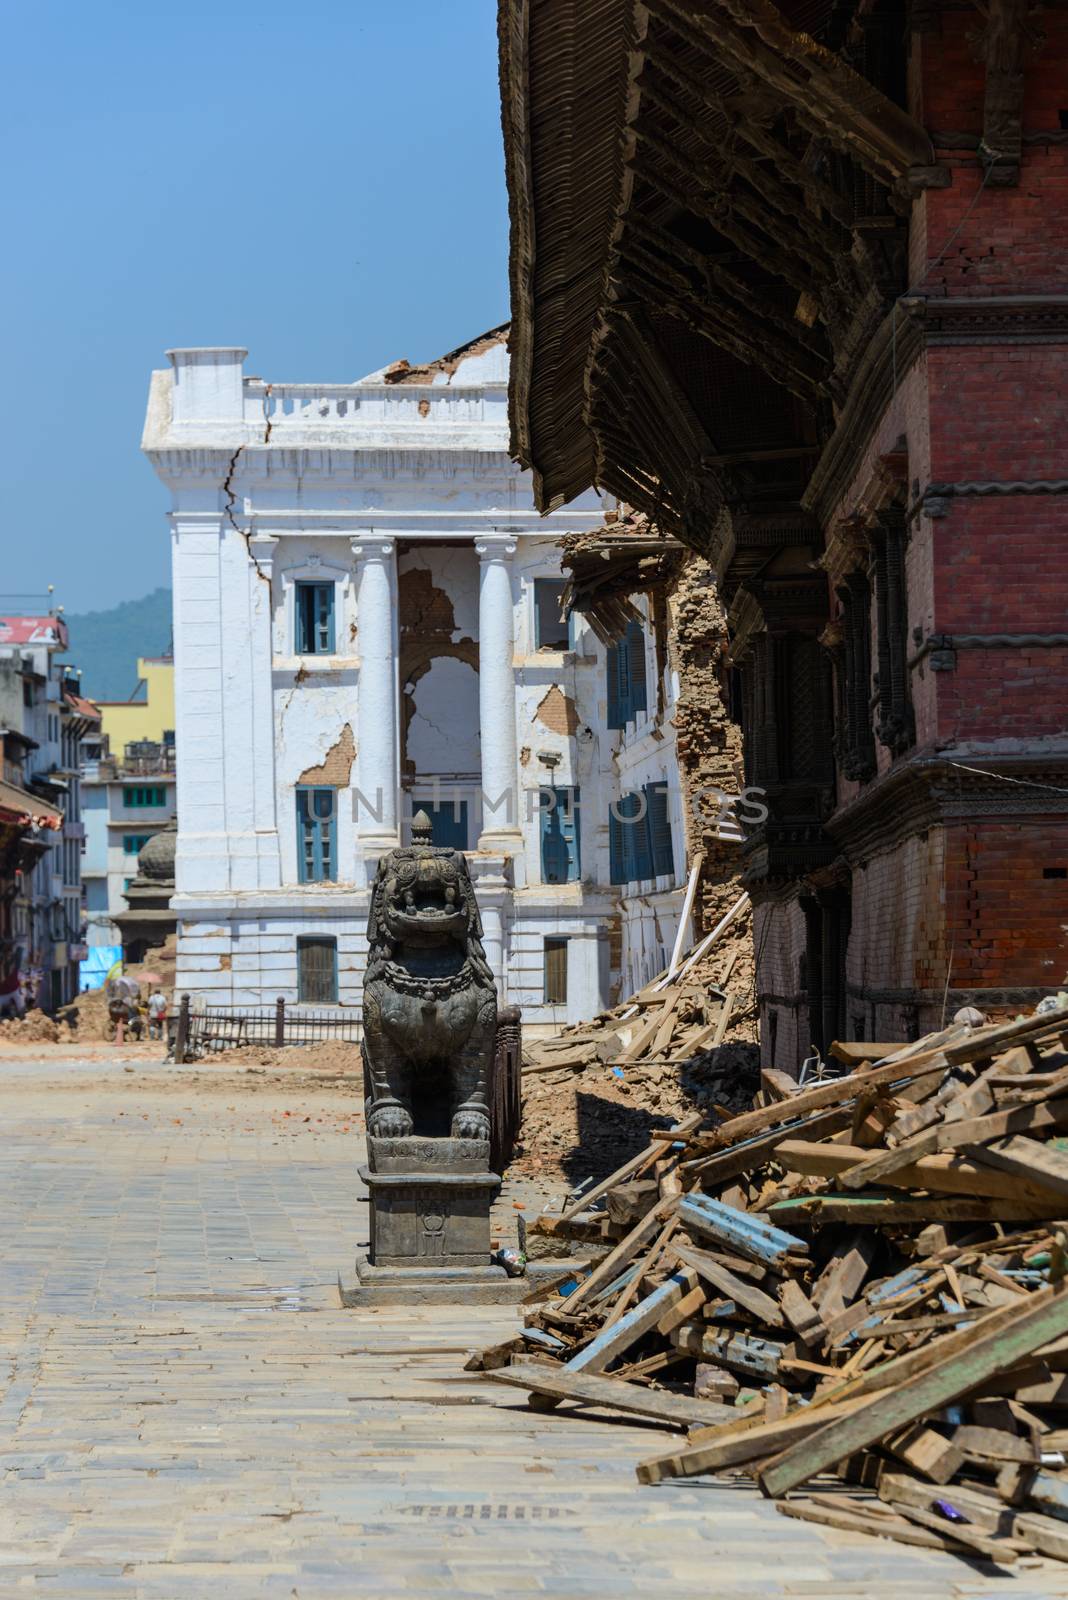 KATHMANDU, NEPAL - MAY 14, 2015: Gaddi Durbar palace on Durbar Square is severely damaged after two major earthquakes hit Nepal in the past weeks.